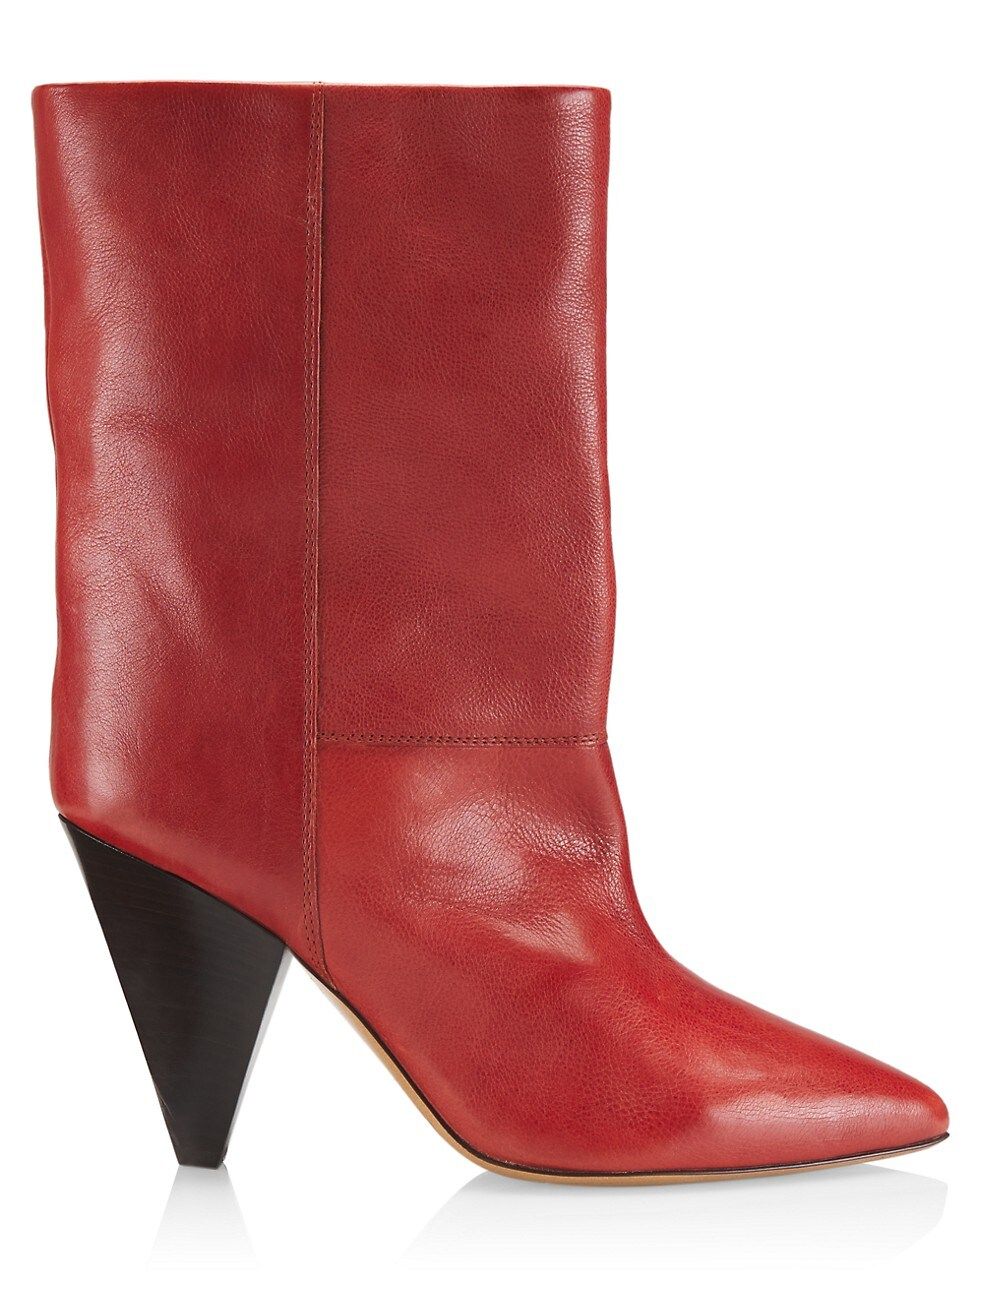 Isabel Marant Locky Leather Mid-Calf Boots | Saks Fifth Avenue